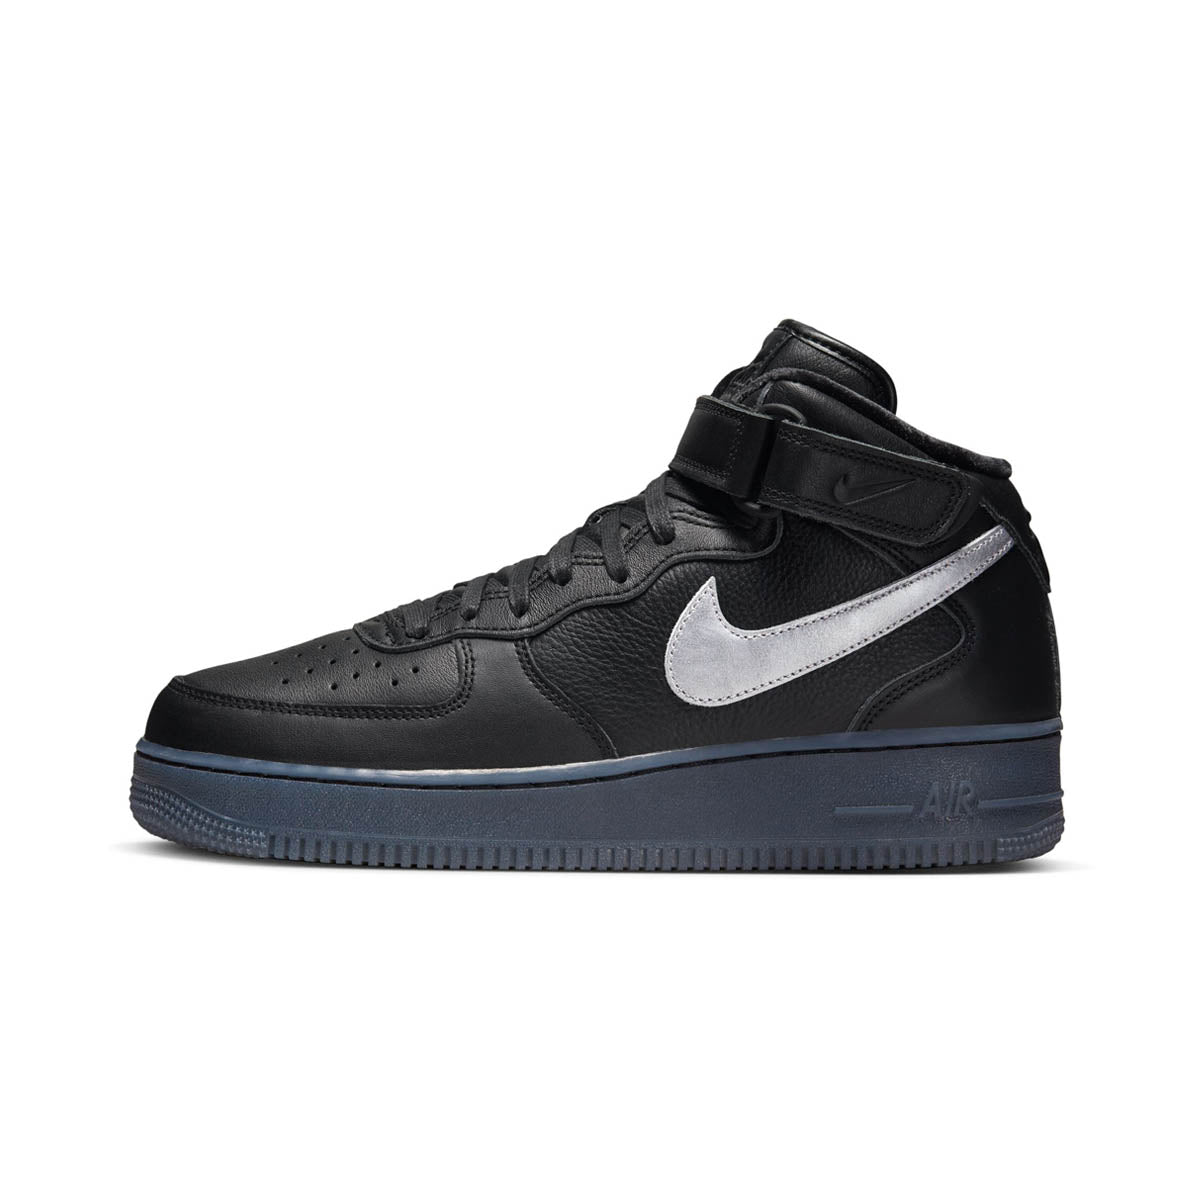  Nike Air Force 1 Mid '07 LV8 Men's Shoes Size-9.5